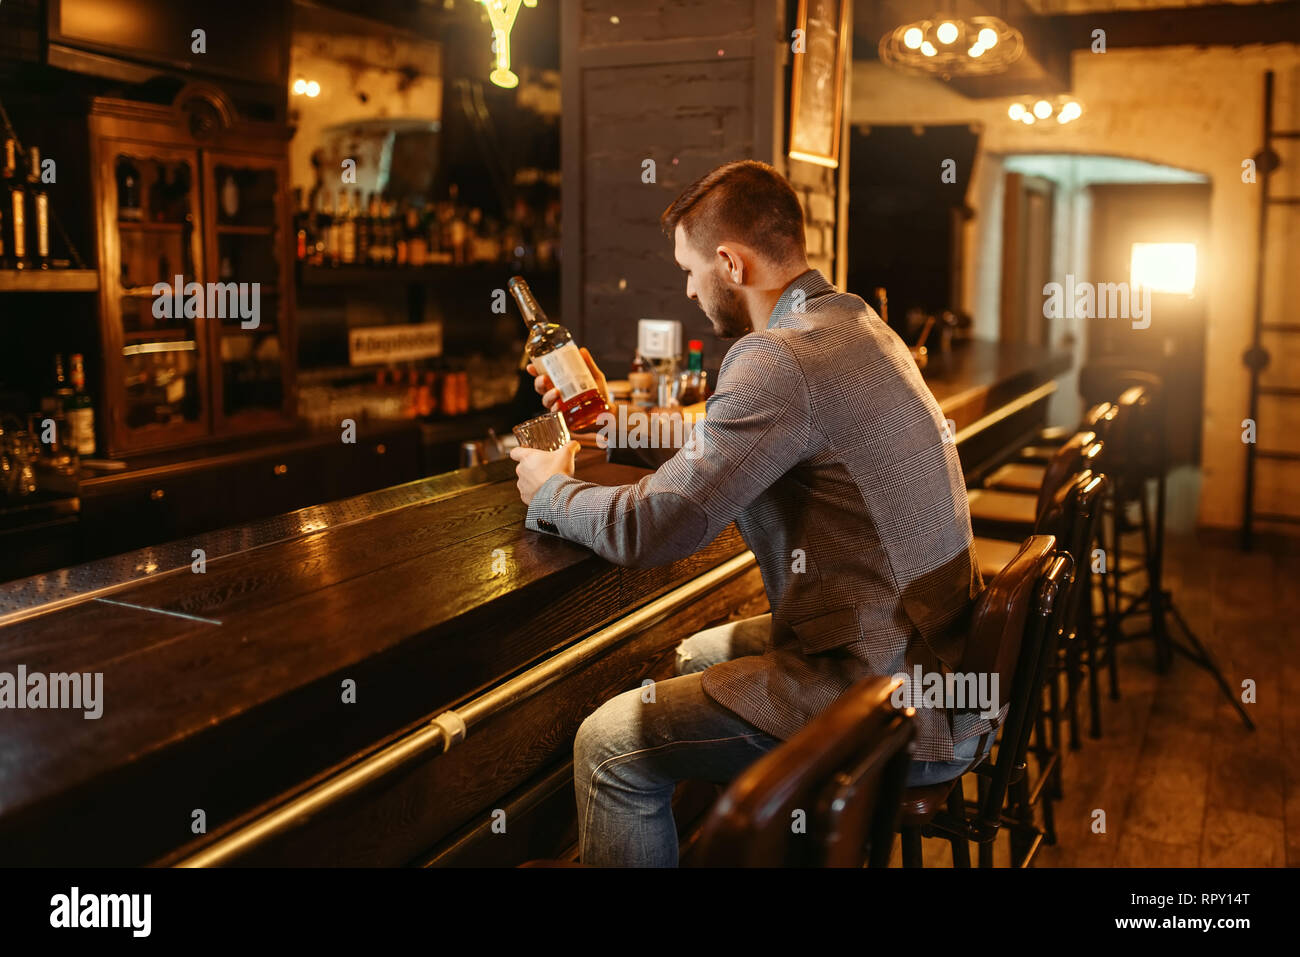 Man with bottle of alcohol beverage drinks at wooden bar counter ...